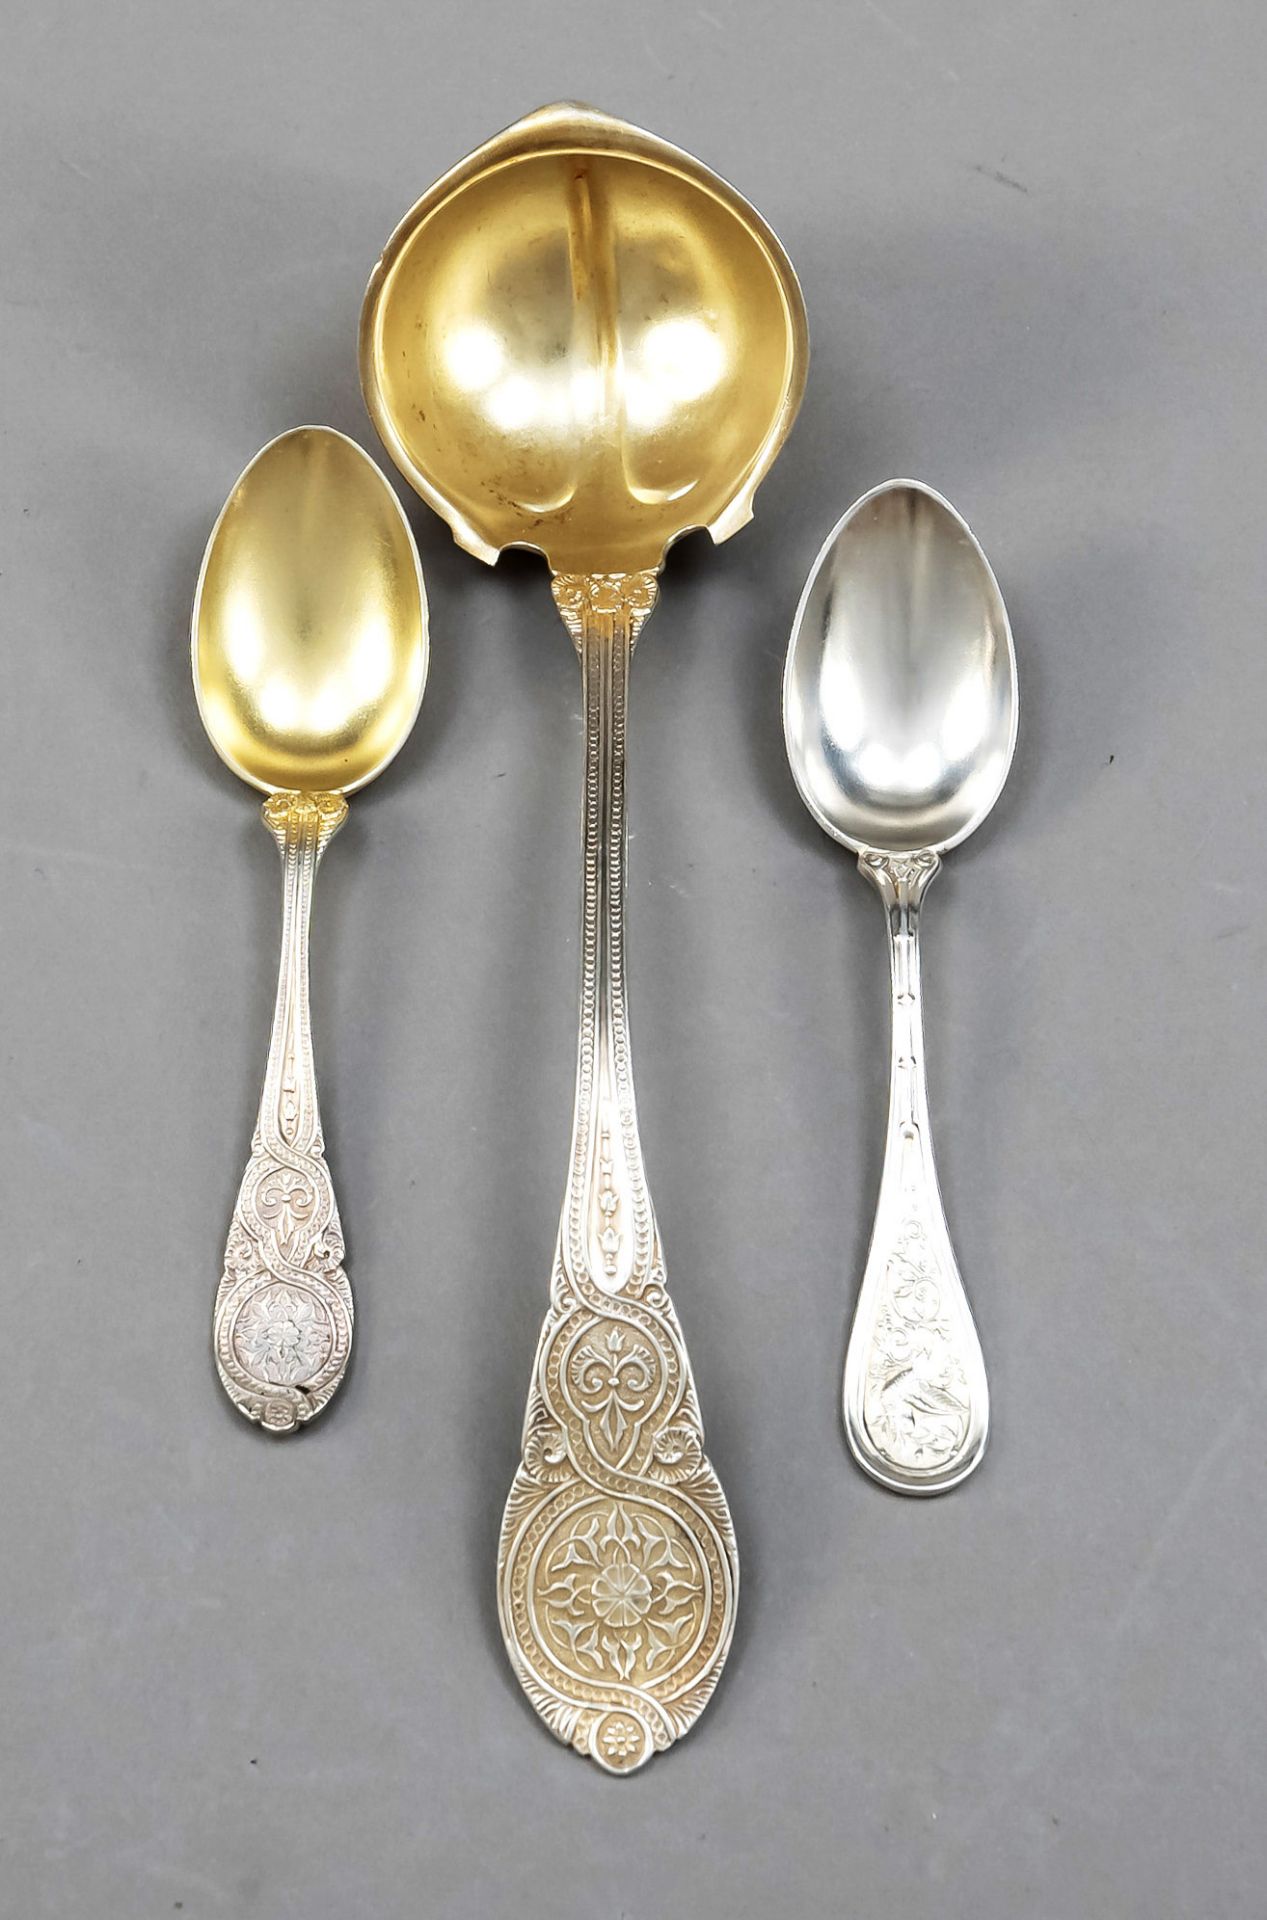 26 pieces of cutlery, early 20th century, different makers, silver 800/000 or sterling silver 925/